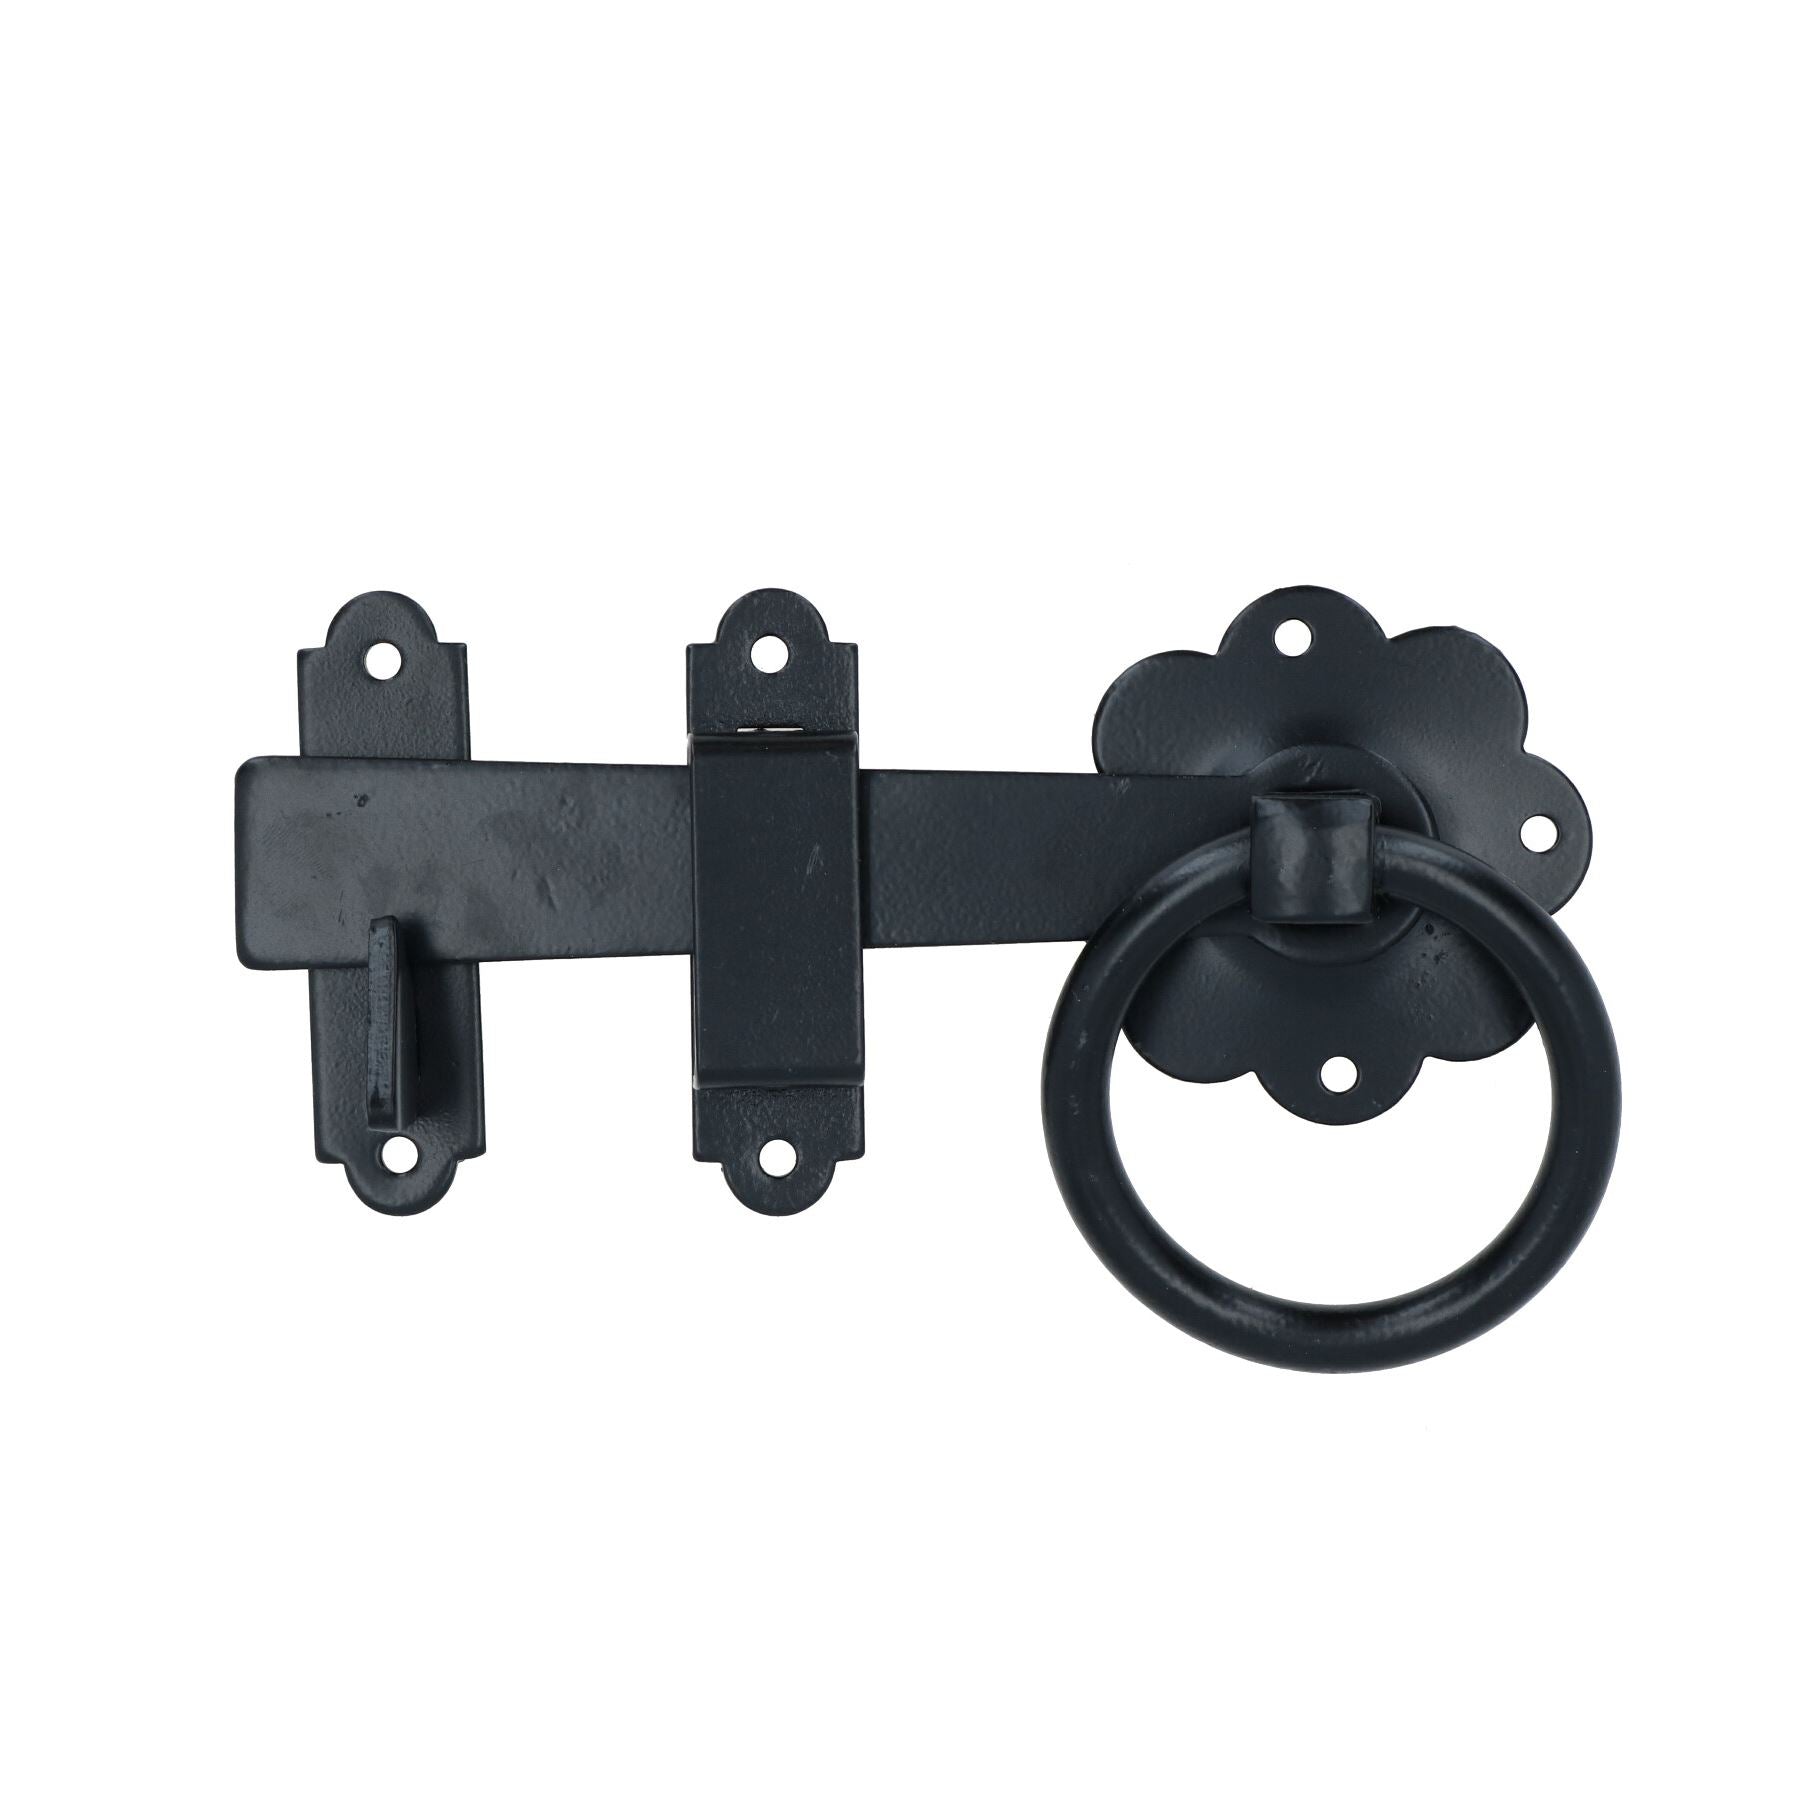 6” (150mm) heavy Duty Twisted Ring Gate Latch Catch for Garden Gates Doors